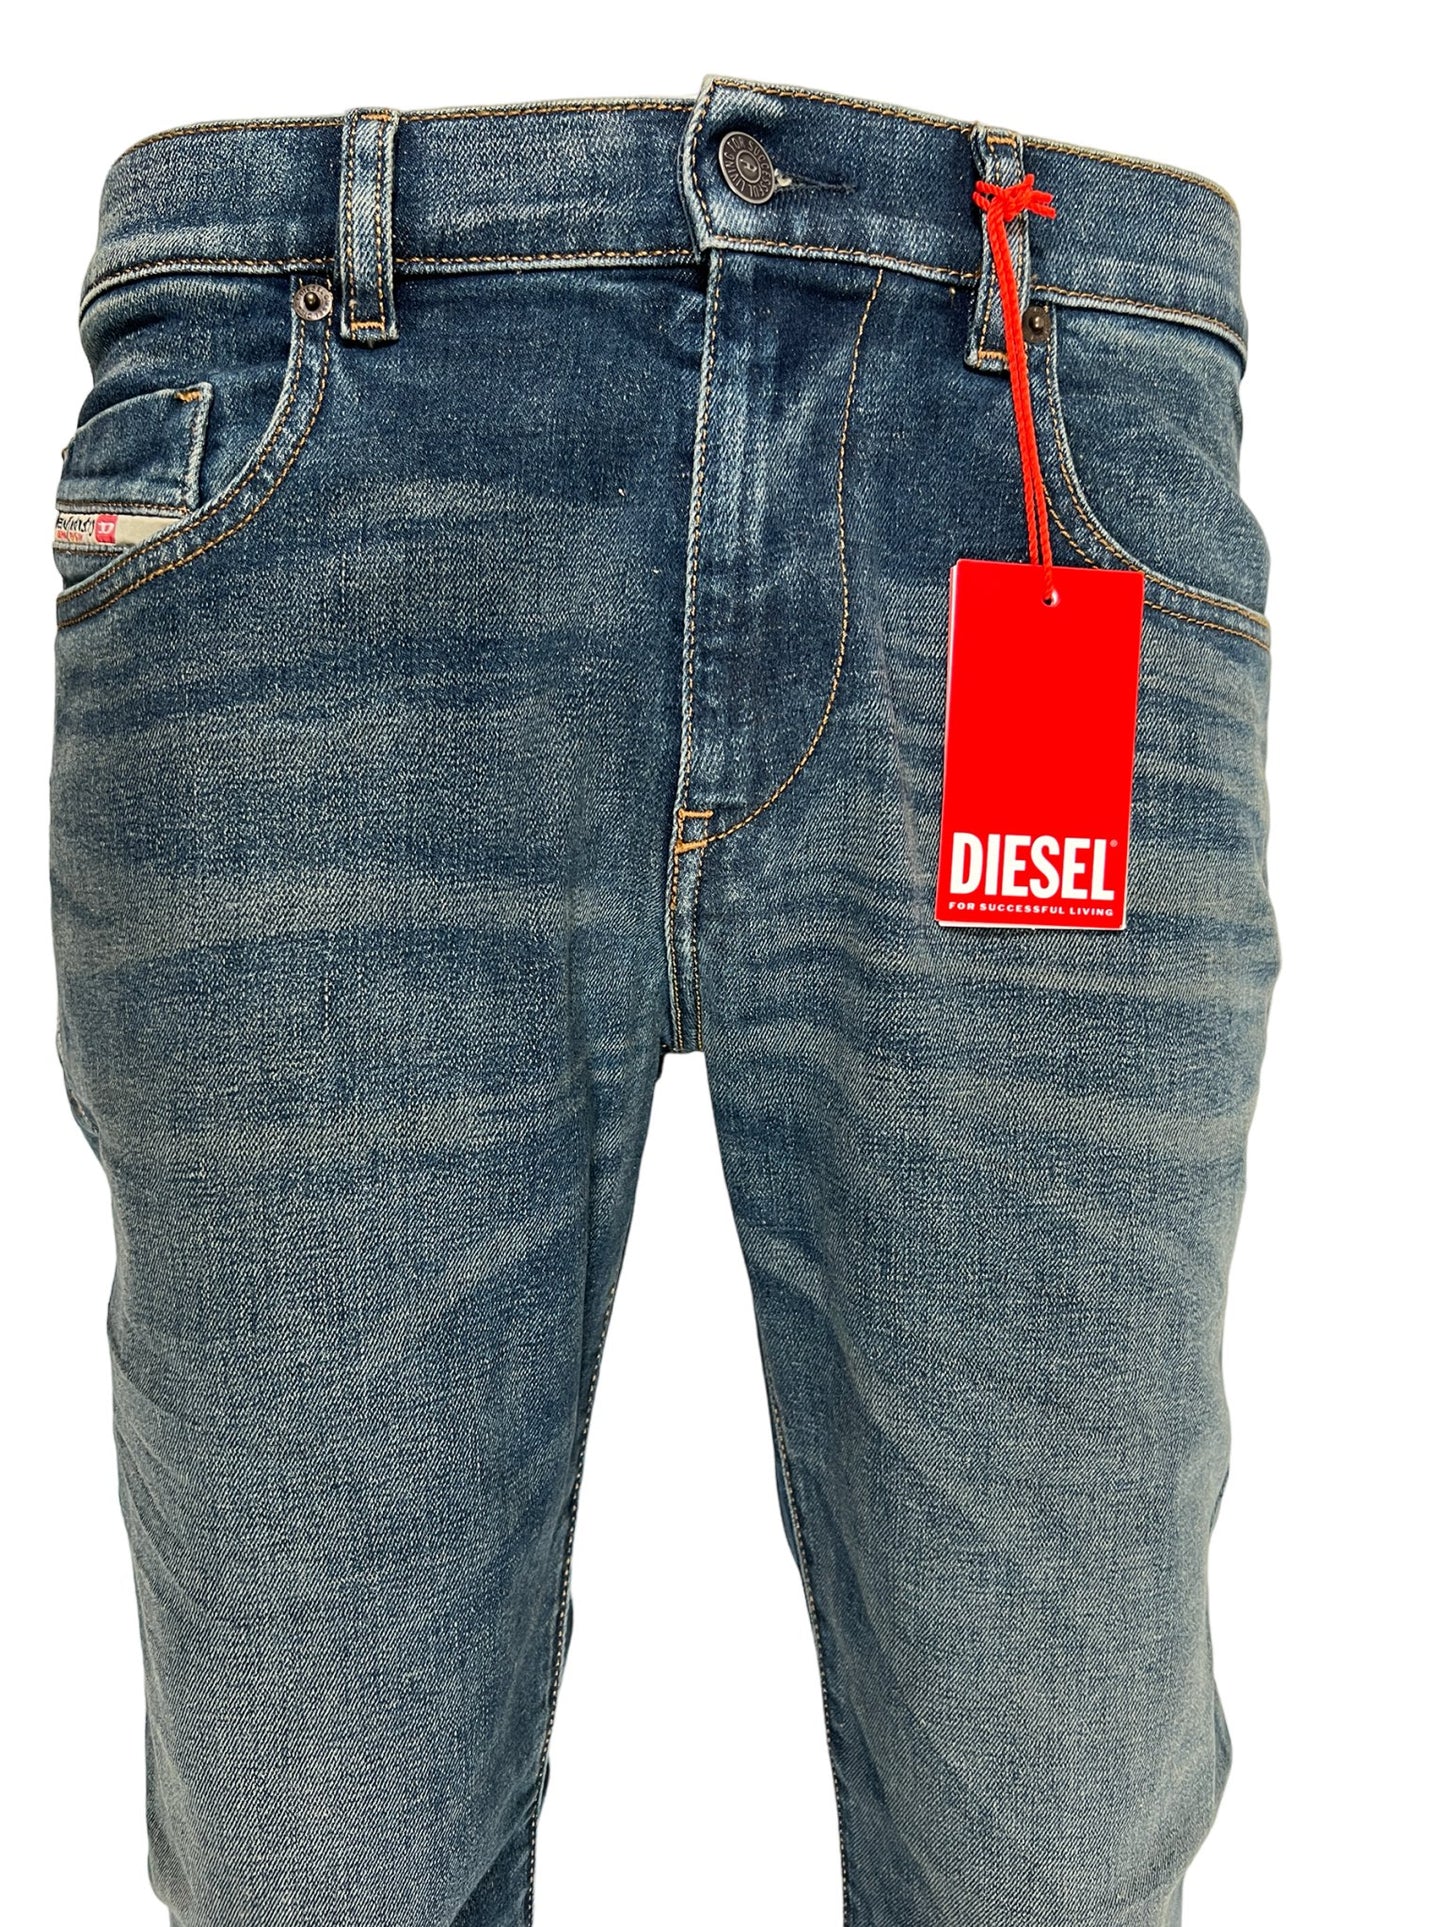 A pair of DIESEL 1979 SLEENKER 9H69 DENIM jeans with a red tag on them.